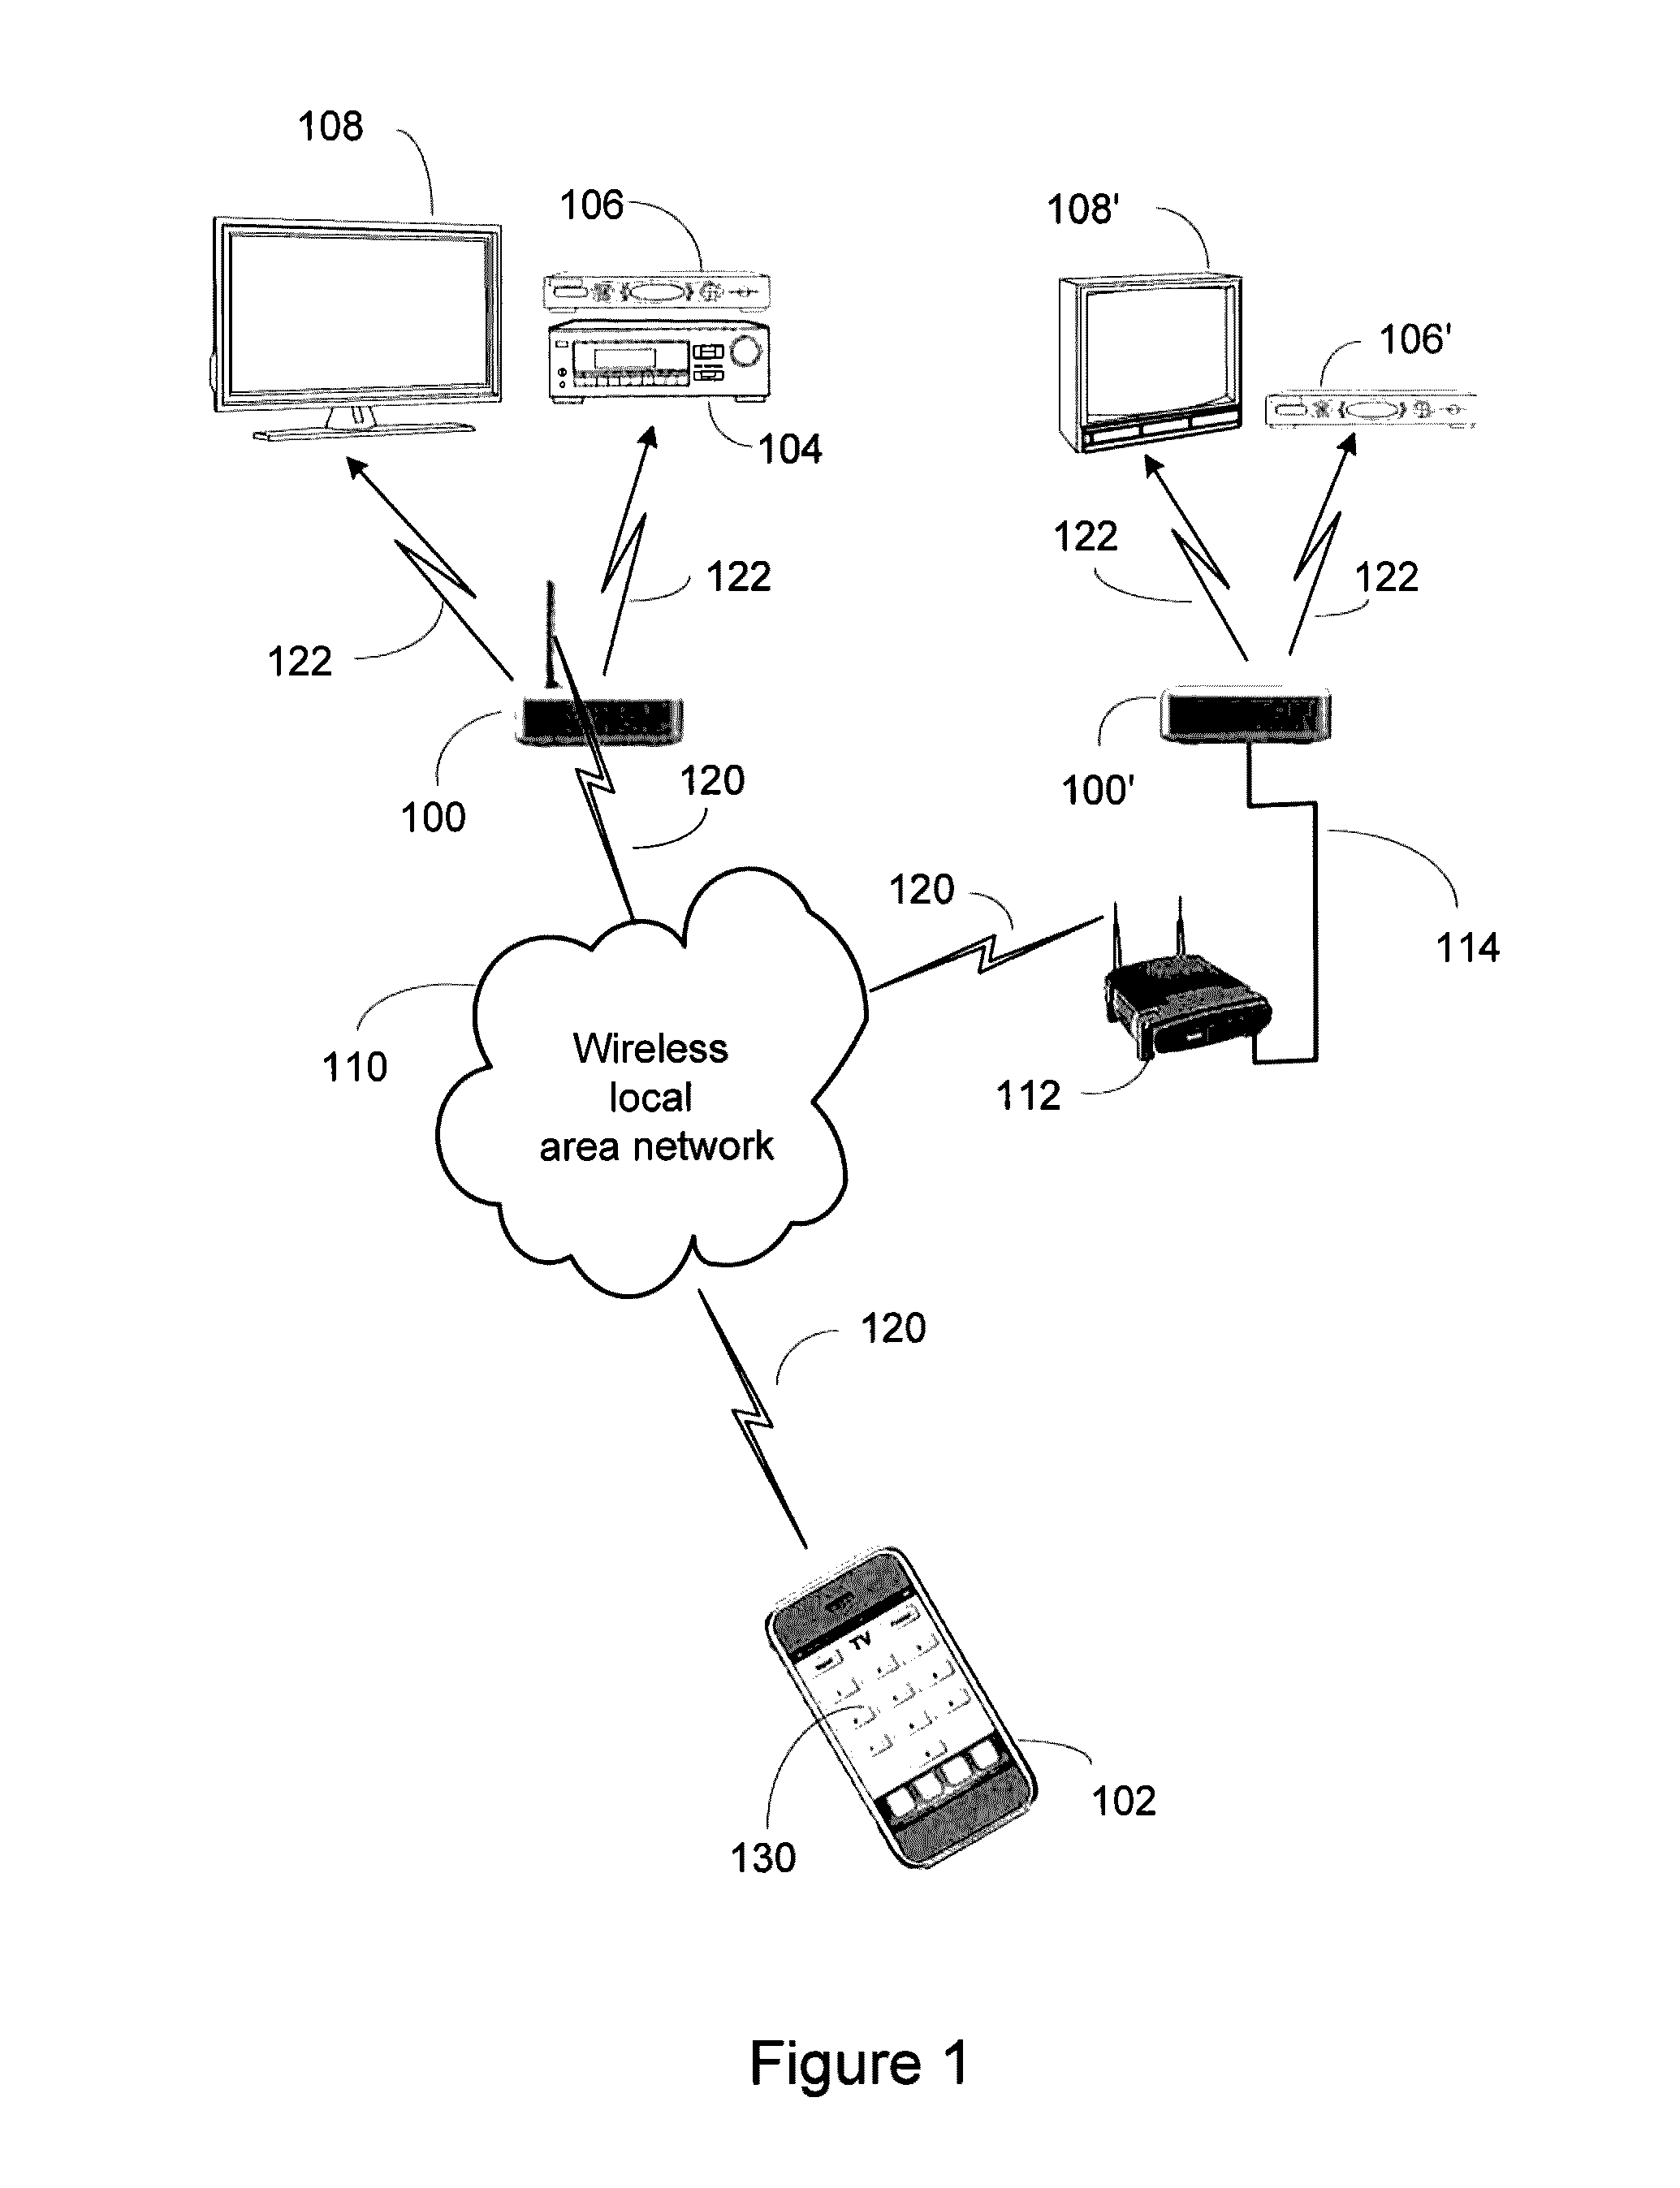 System and method for appliance control via a personal communication or entertainment device